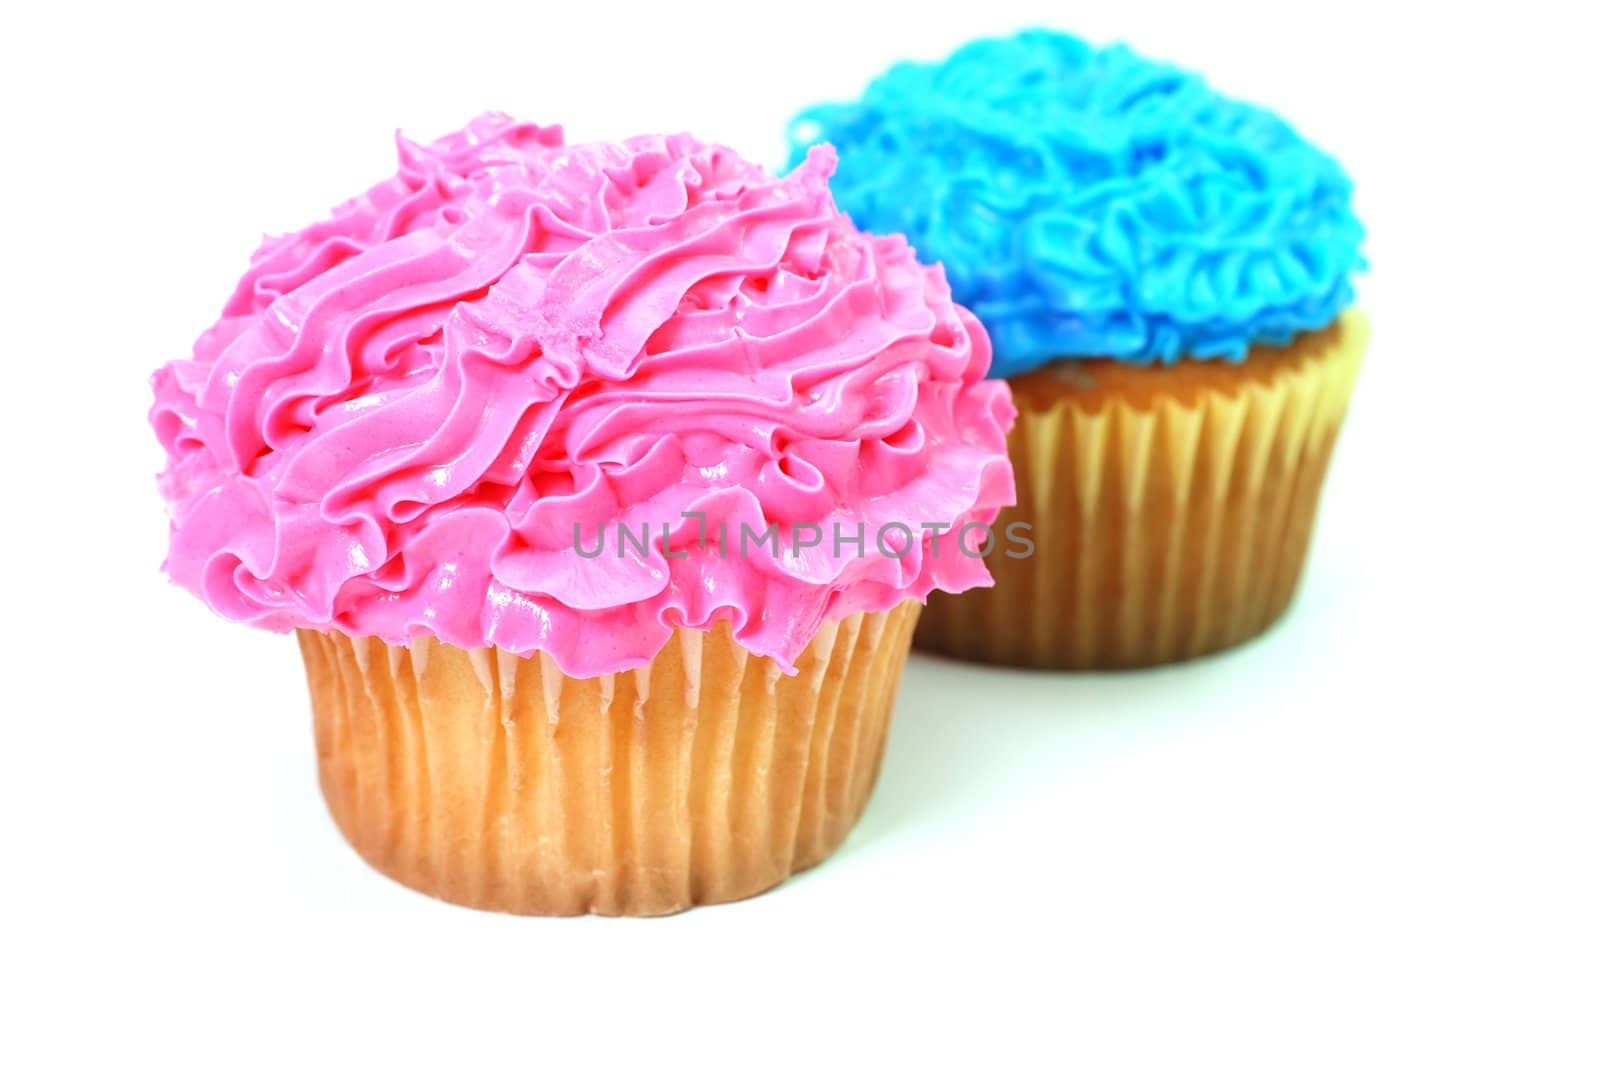 Cupcakes by dehooks